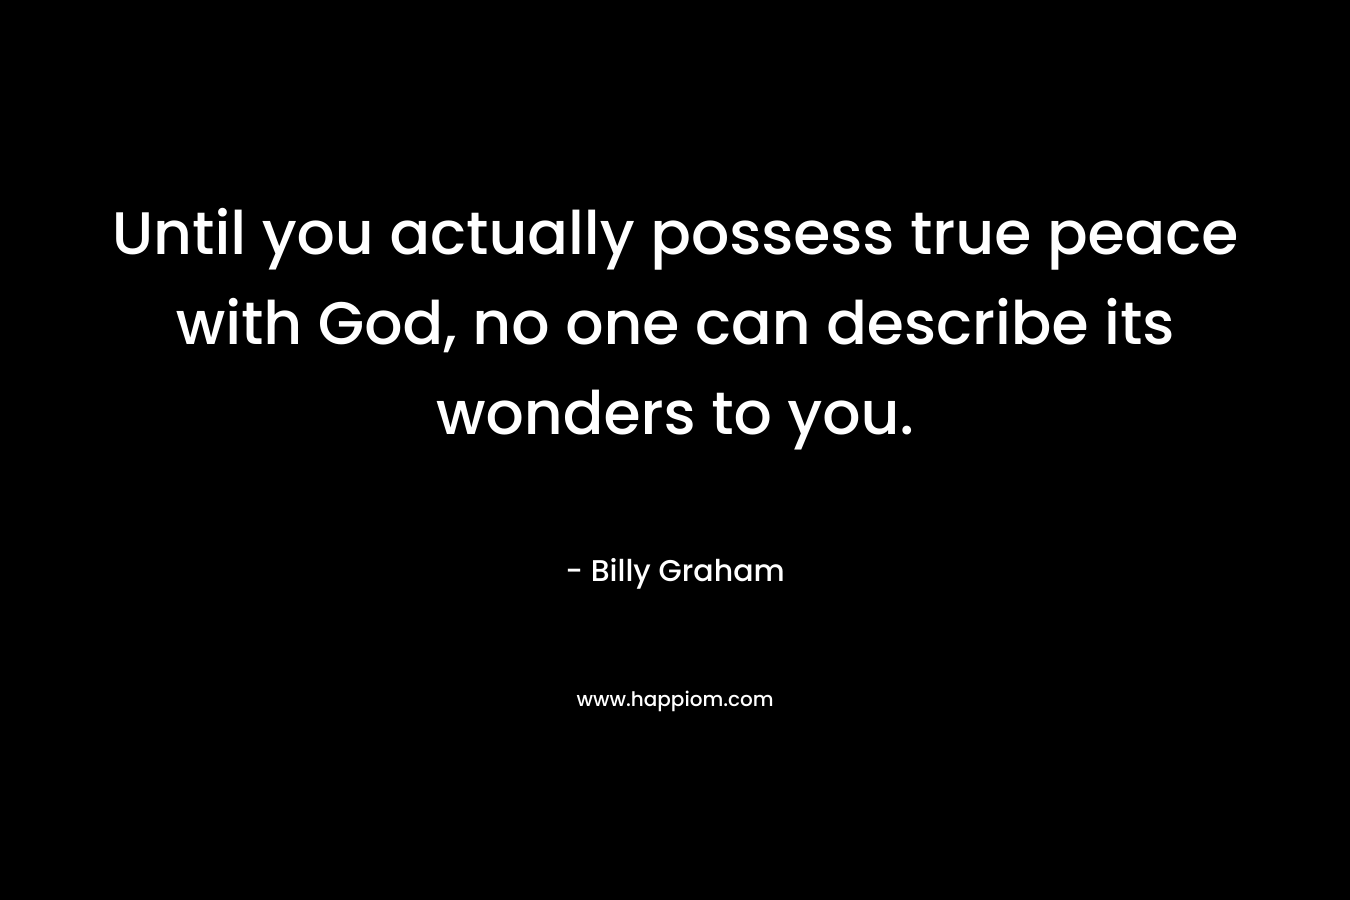 Until you actually possess true peace with God, no one can describe its wonders to you.